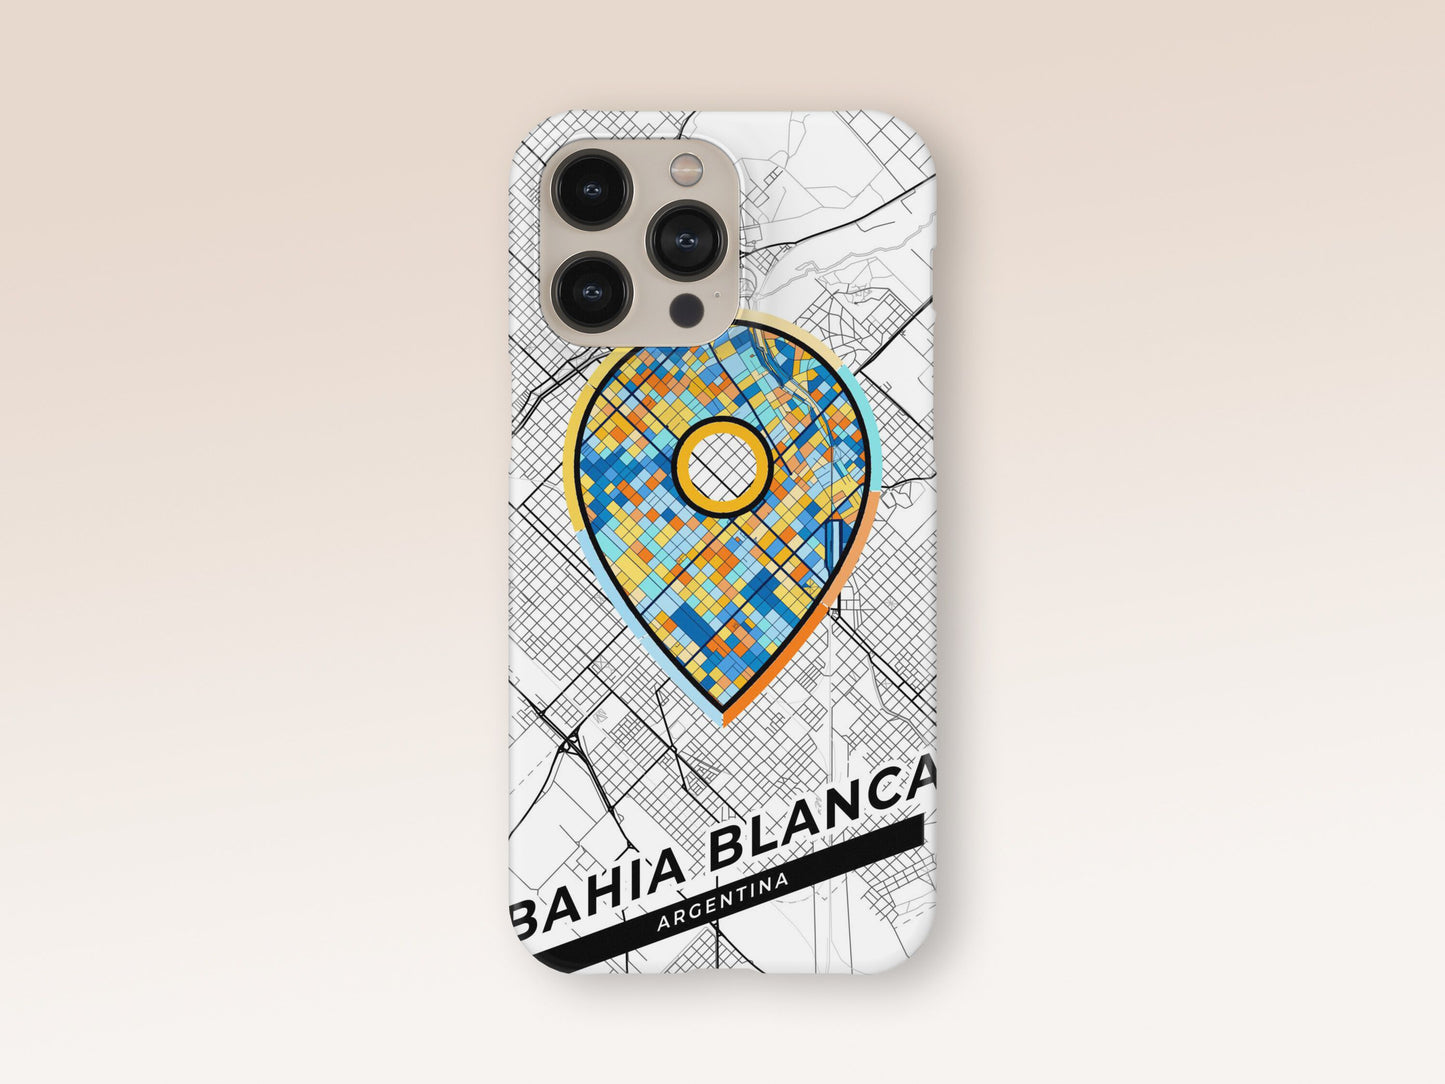 Bahia Blanca Argentina slim phone case with colorful icon. Birthday, wedding or housewarming gift. Couple match cases. 1